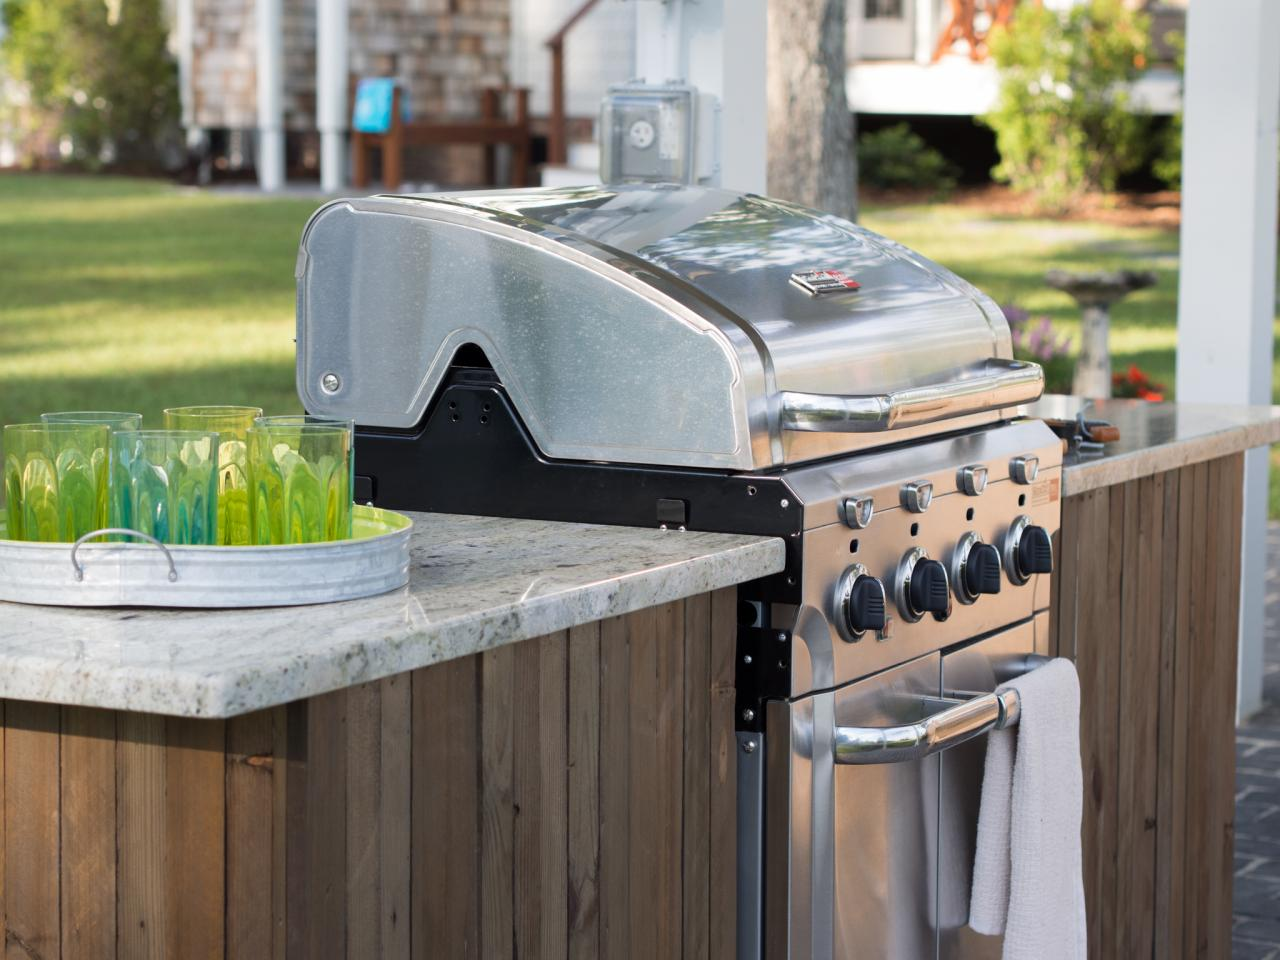 Outdoor Island with Grill: These 10 DIY Outdoor Kitchen Ideas will add some flare to your outdoor space and save you money. 